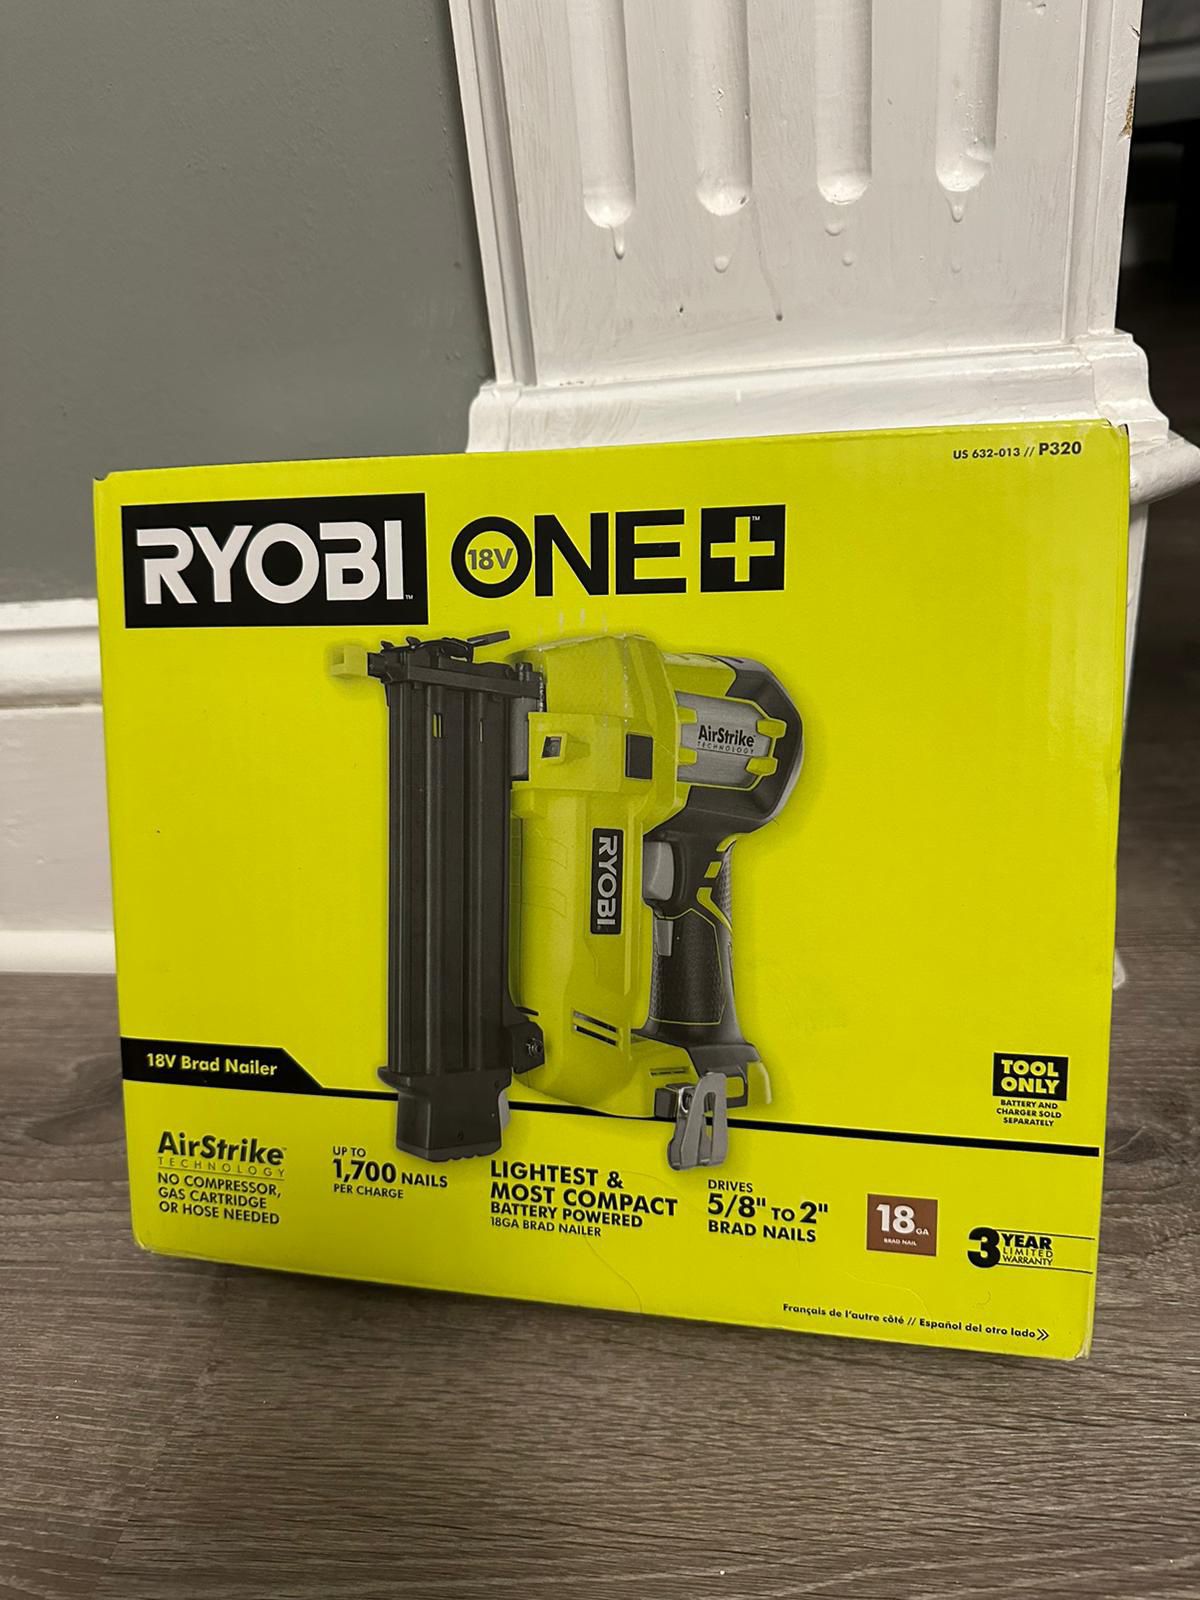 RYOBI 18-VOLT ONE+ AIRSTRIKE CORDLESS BRAD NAILER, 18-GAUGE, TOOL ONLY for  Sale in Providence, RI OfferUp